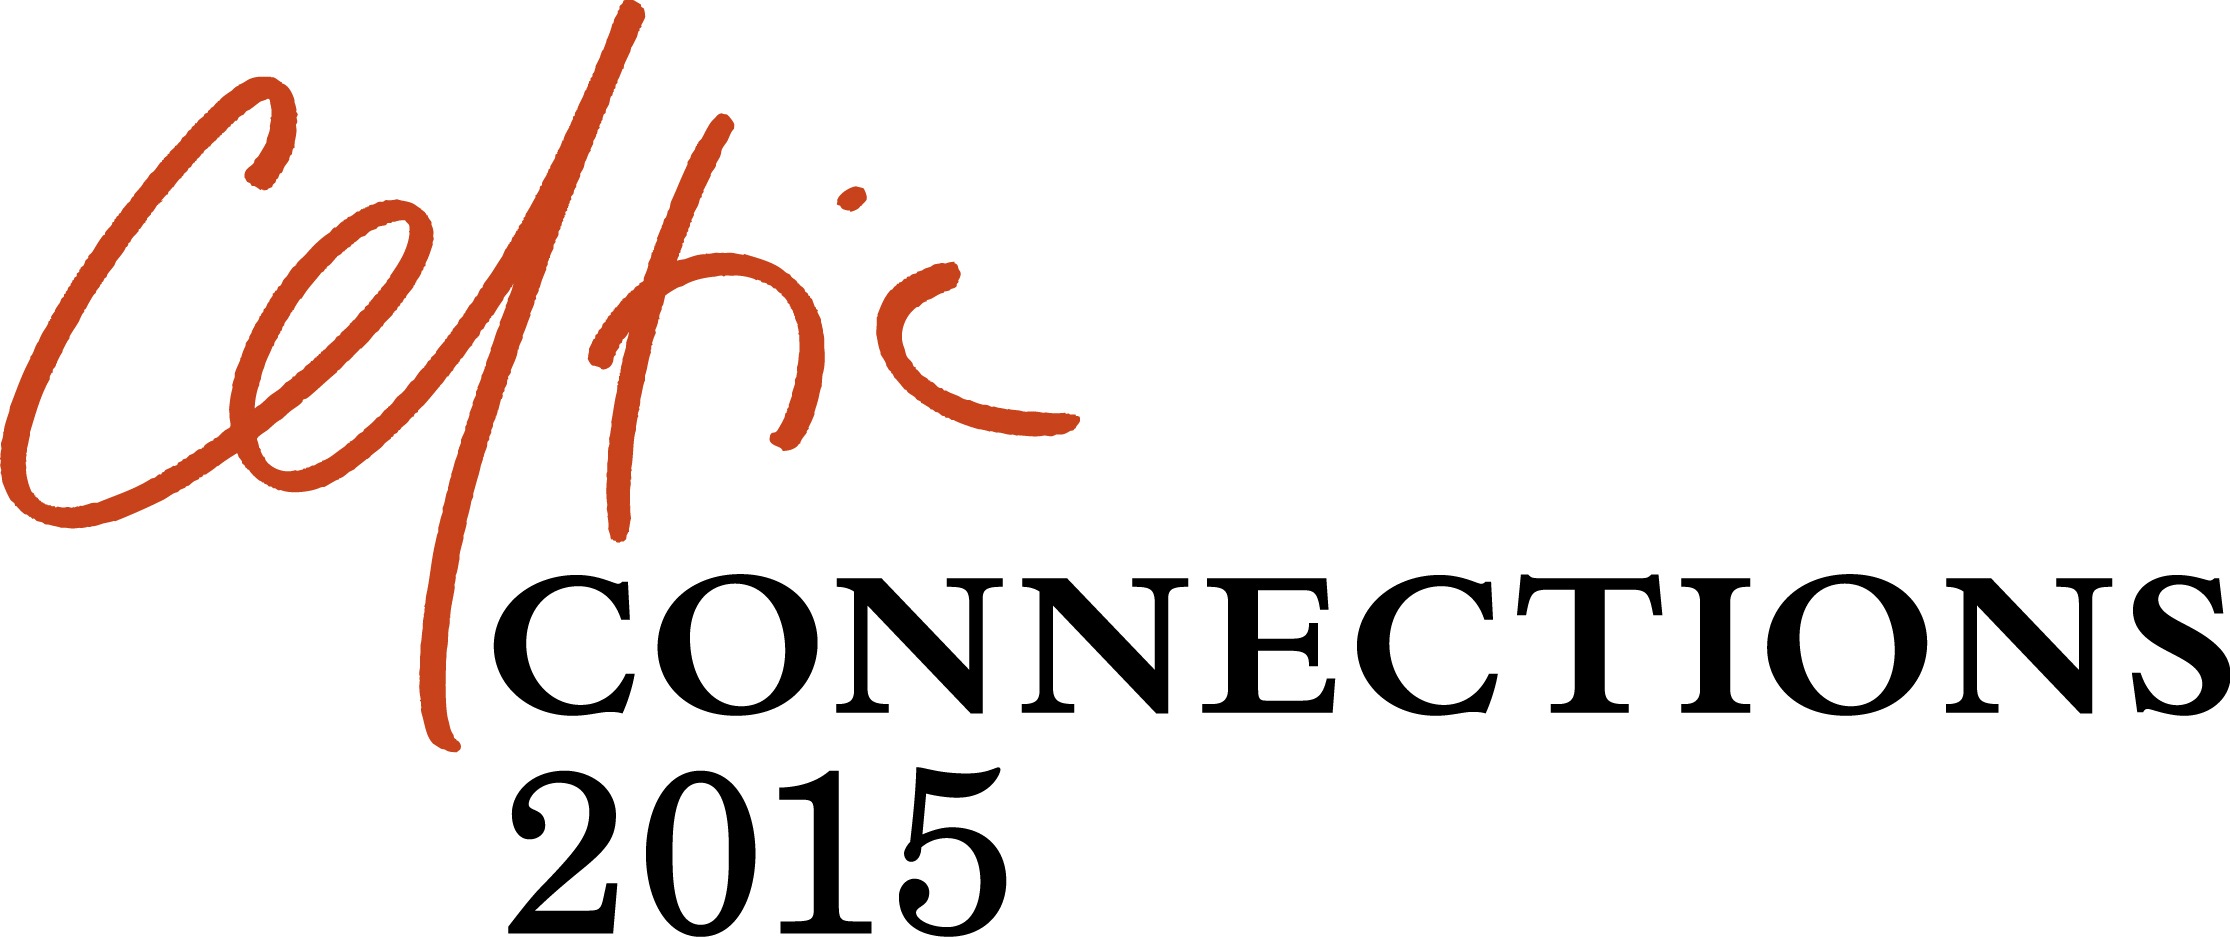 Celtic Connections 2015 Preview